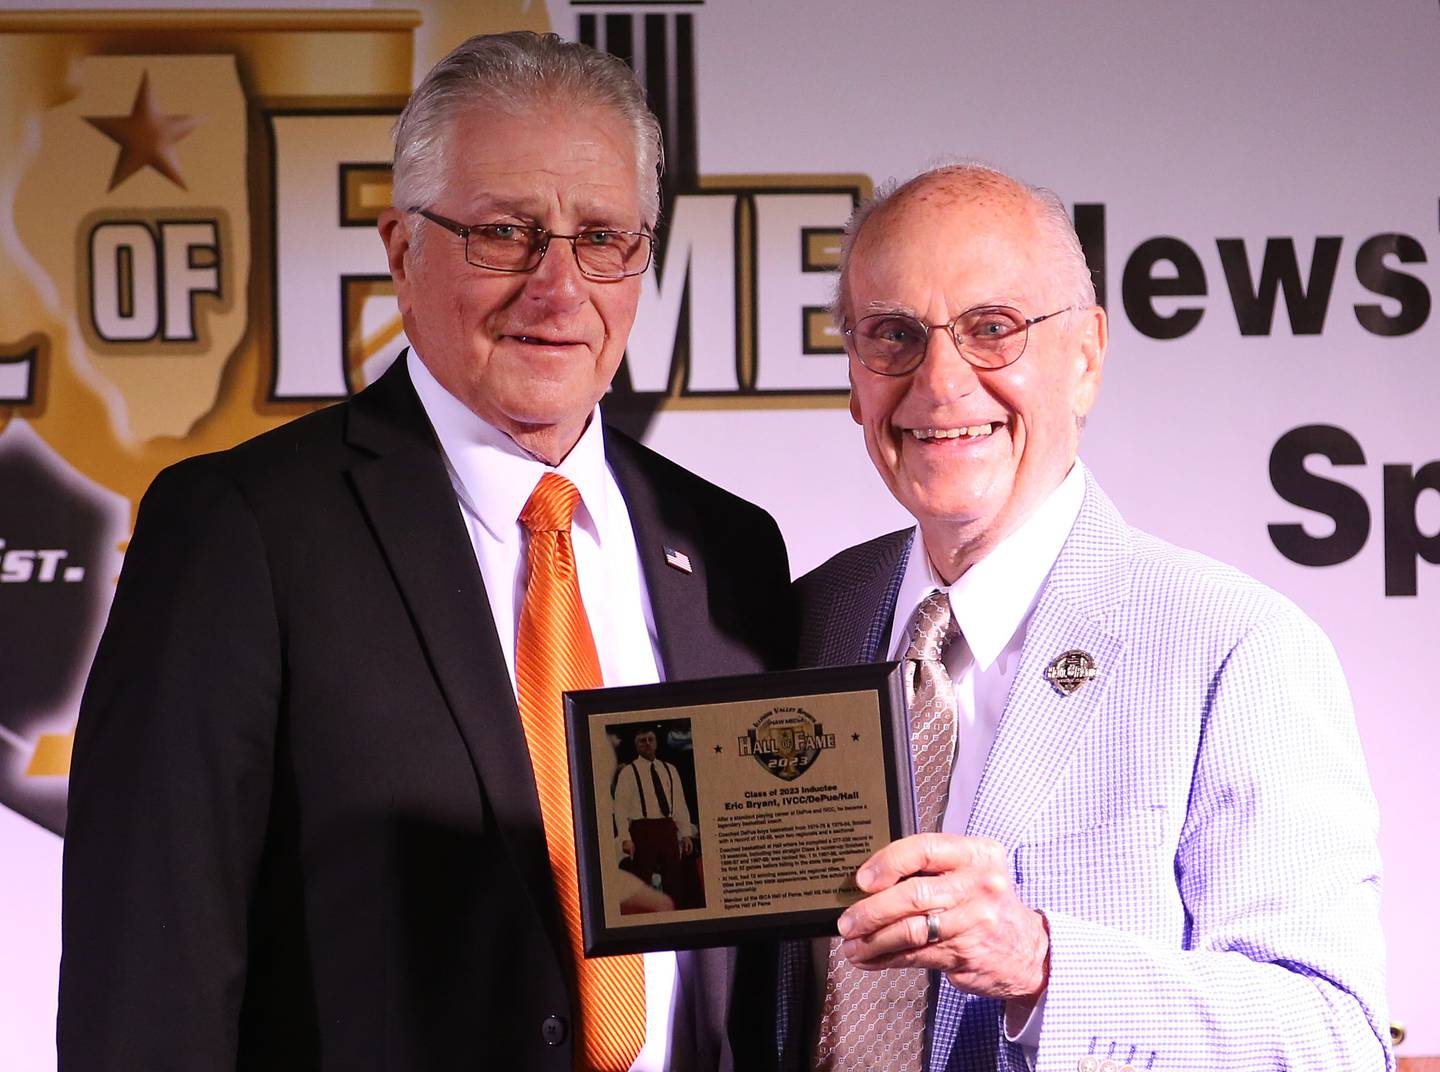 Eric Bryant receives his award from Lanny Slevin Emcee during the Shaw Media Illinois Valley Sports Hall of Fame on Thursday, June 8, 2023 at the Auditorium Ballroom in La Salle. Bryant was a legendary basketball coach at DePue and Hall High School where he won two straight Class A runner-up finishes in 1996-1997 and 1997-1998.